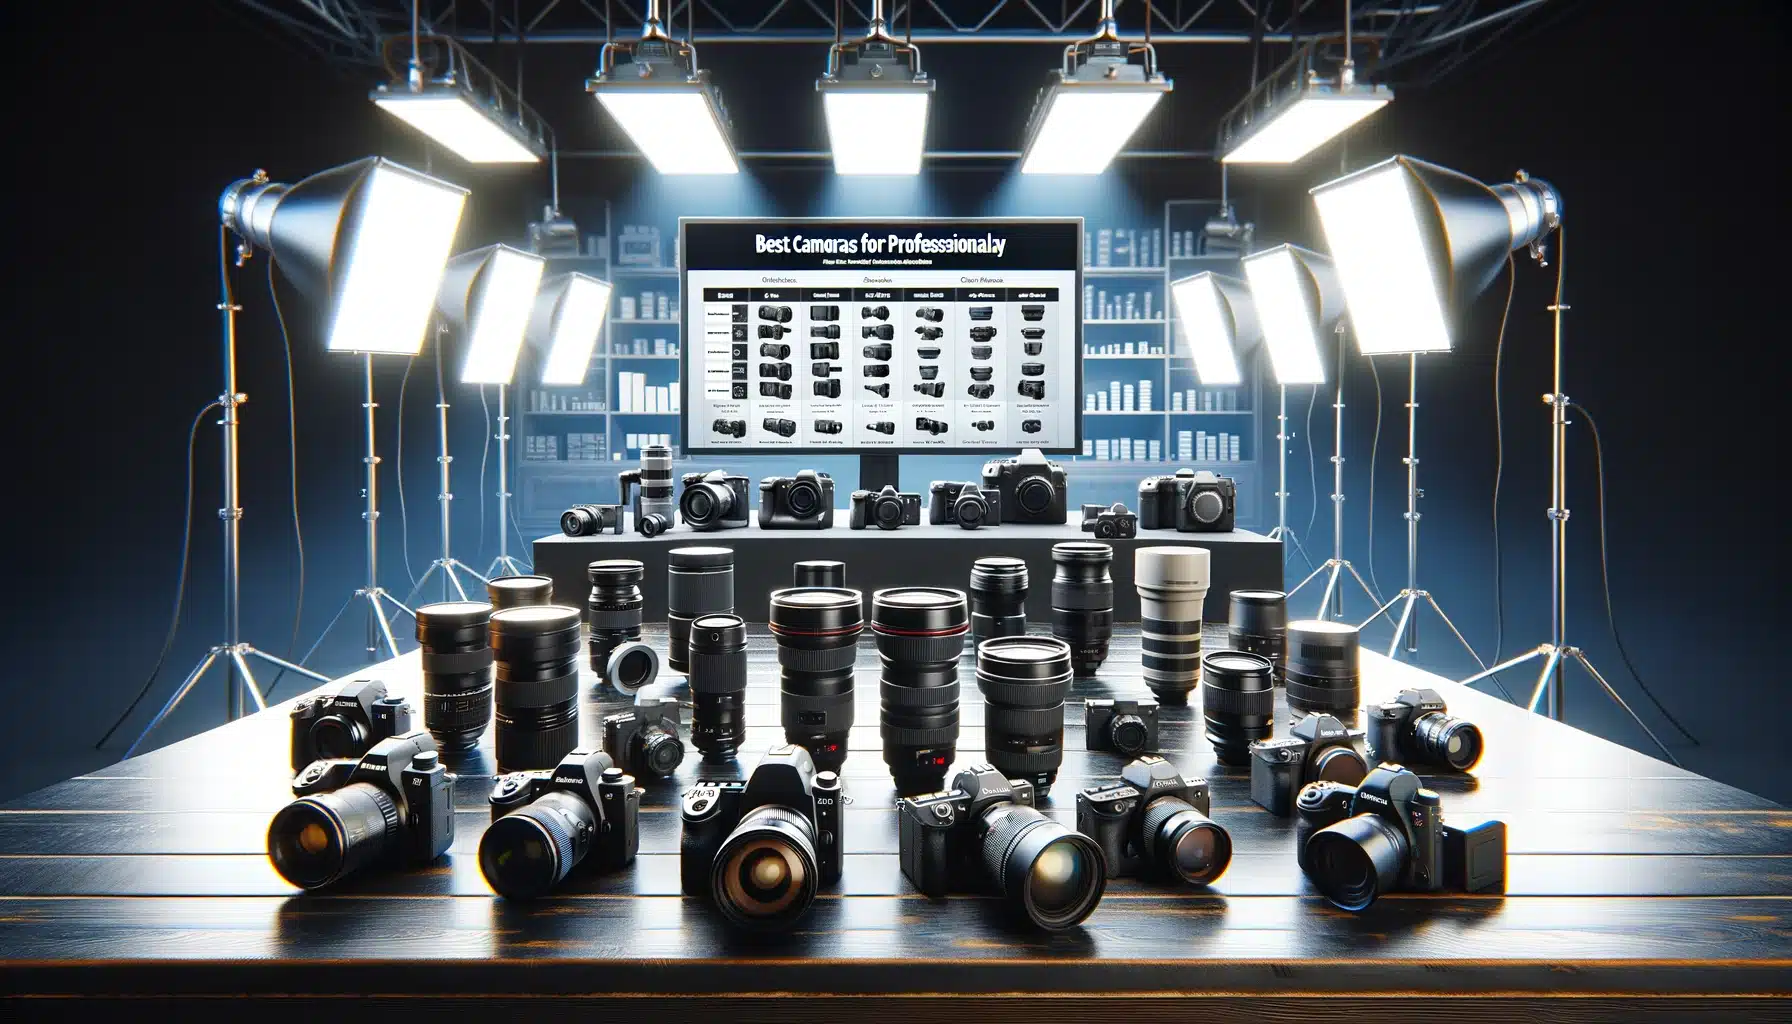 Professional photography studio with various high-end cameras on display and a comparison chart on a monitor, highlighting top choices for professional photography.